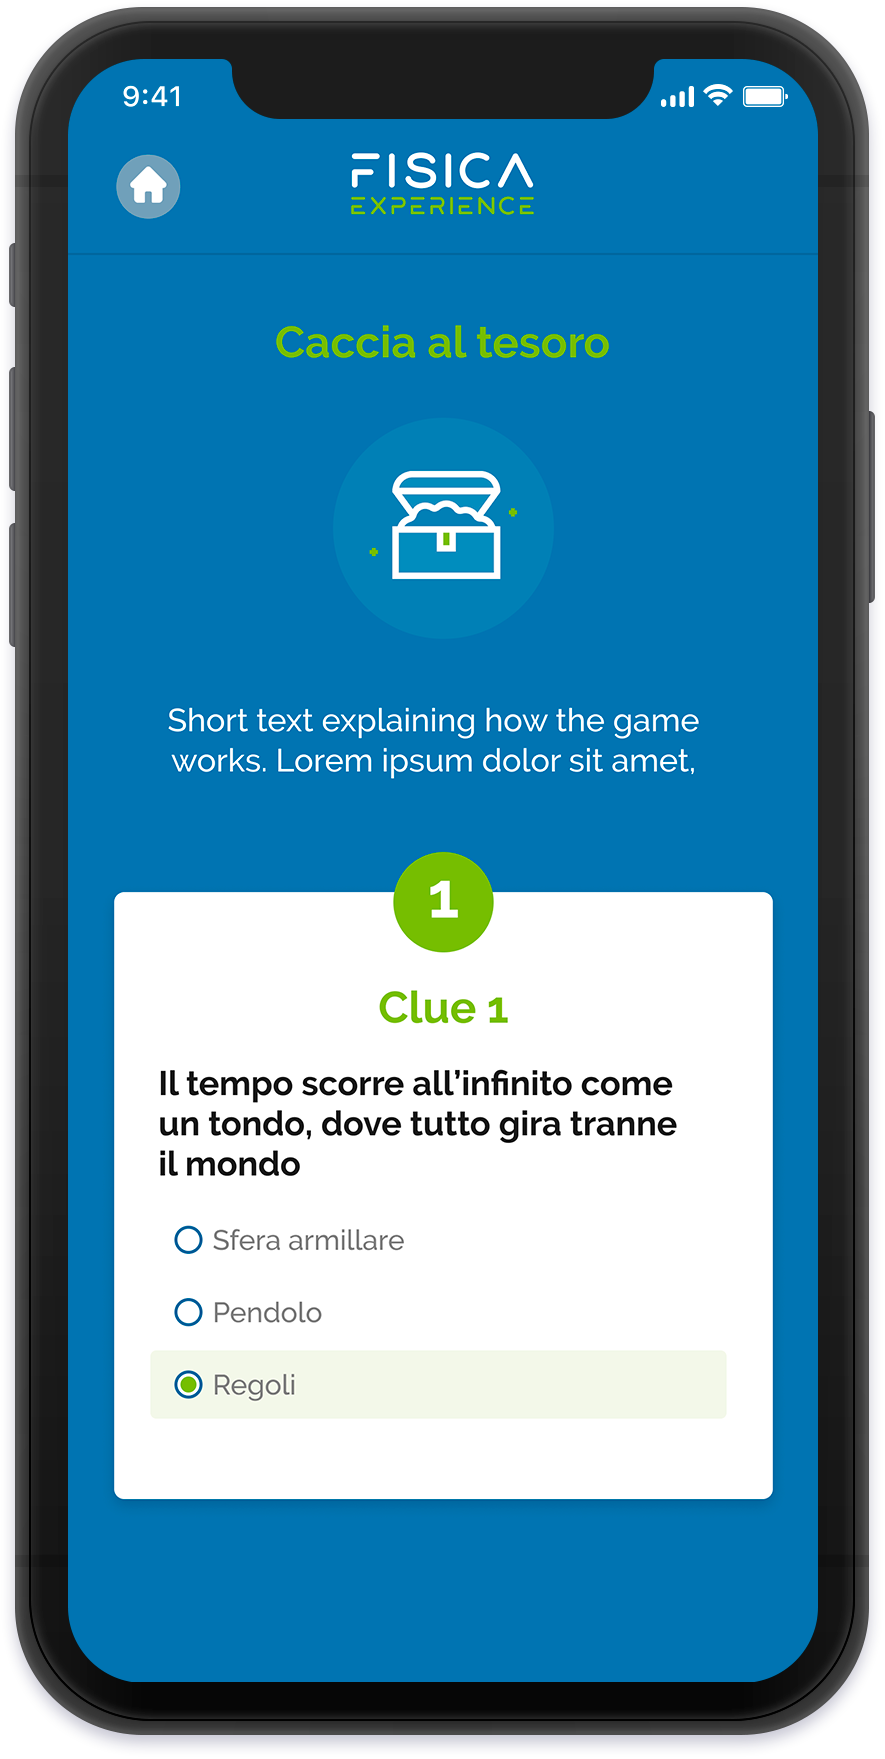 Fisica Experience Mobile Tour clue mockup